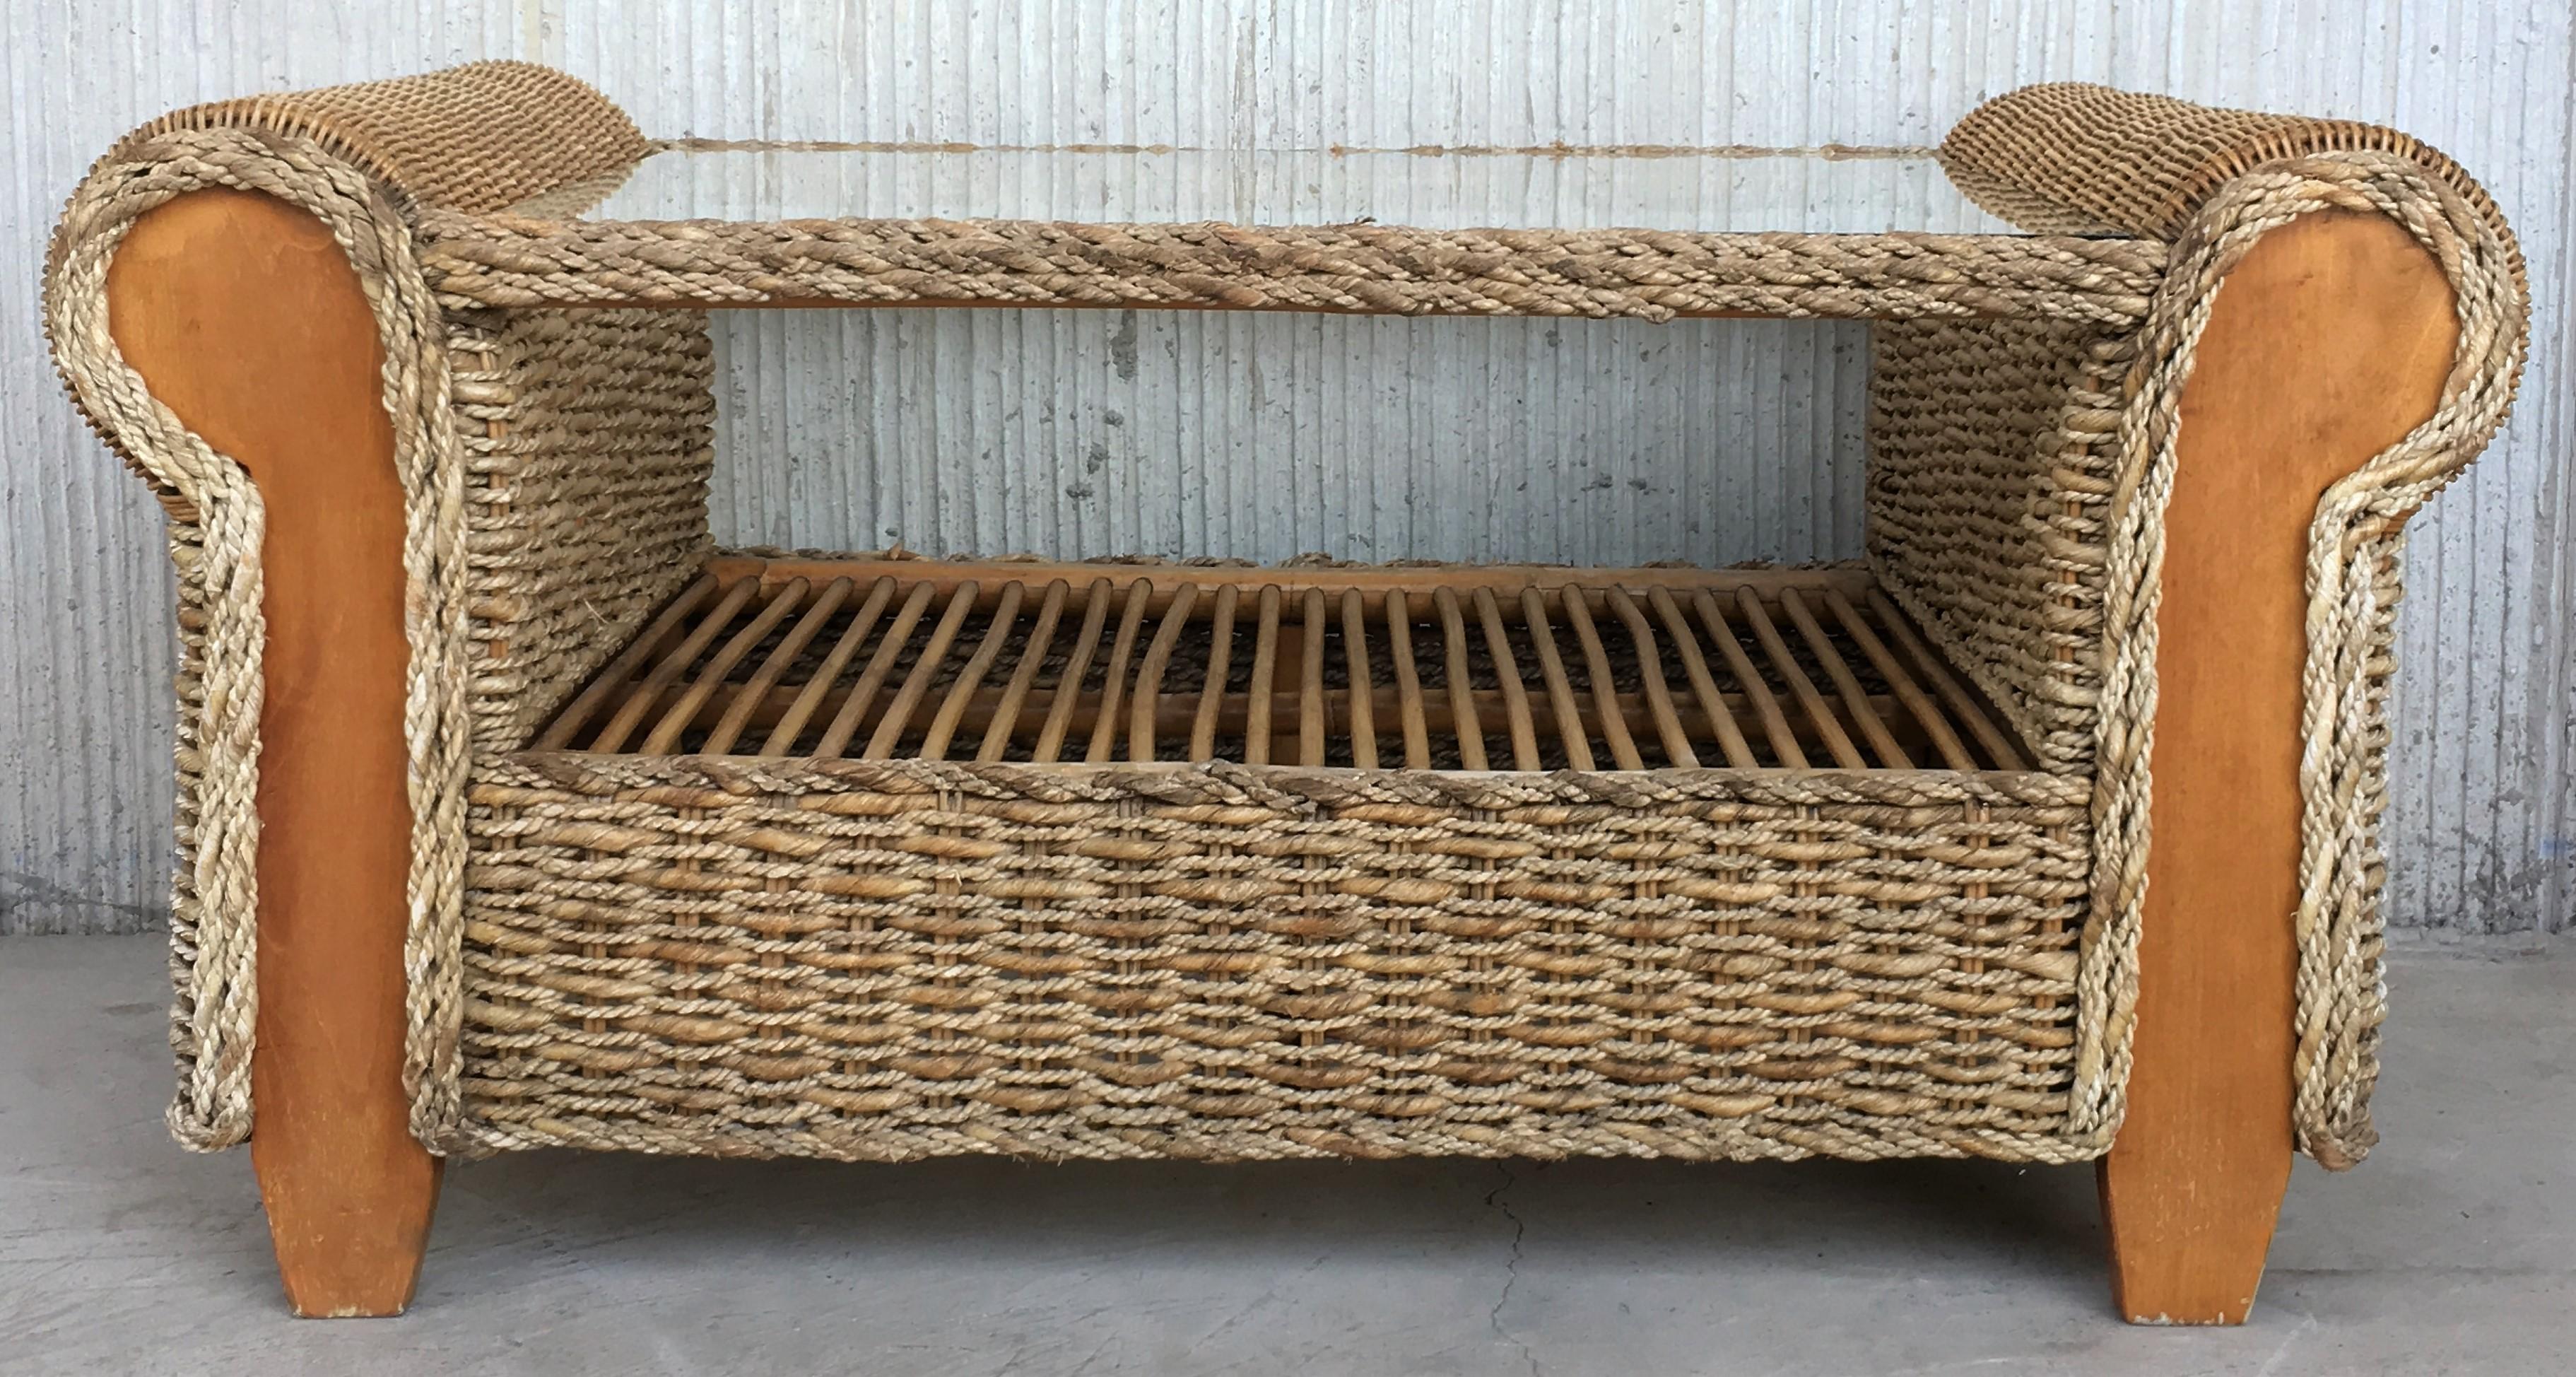 Midcentury Rattan and Wood Coffee Table In Good Condition For Sale In Miami, FL